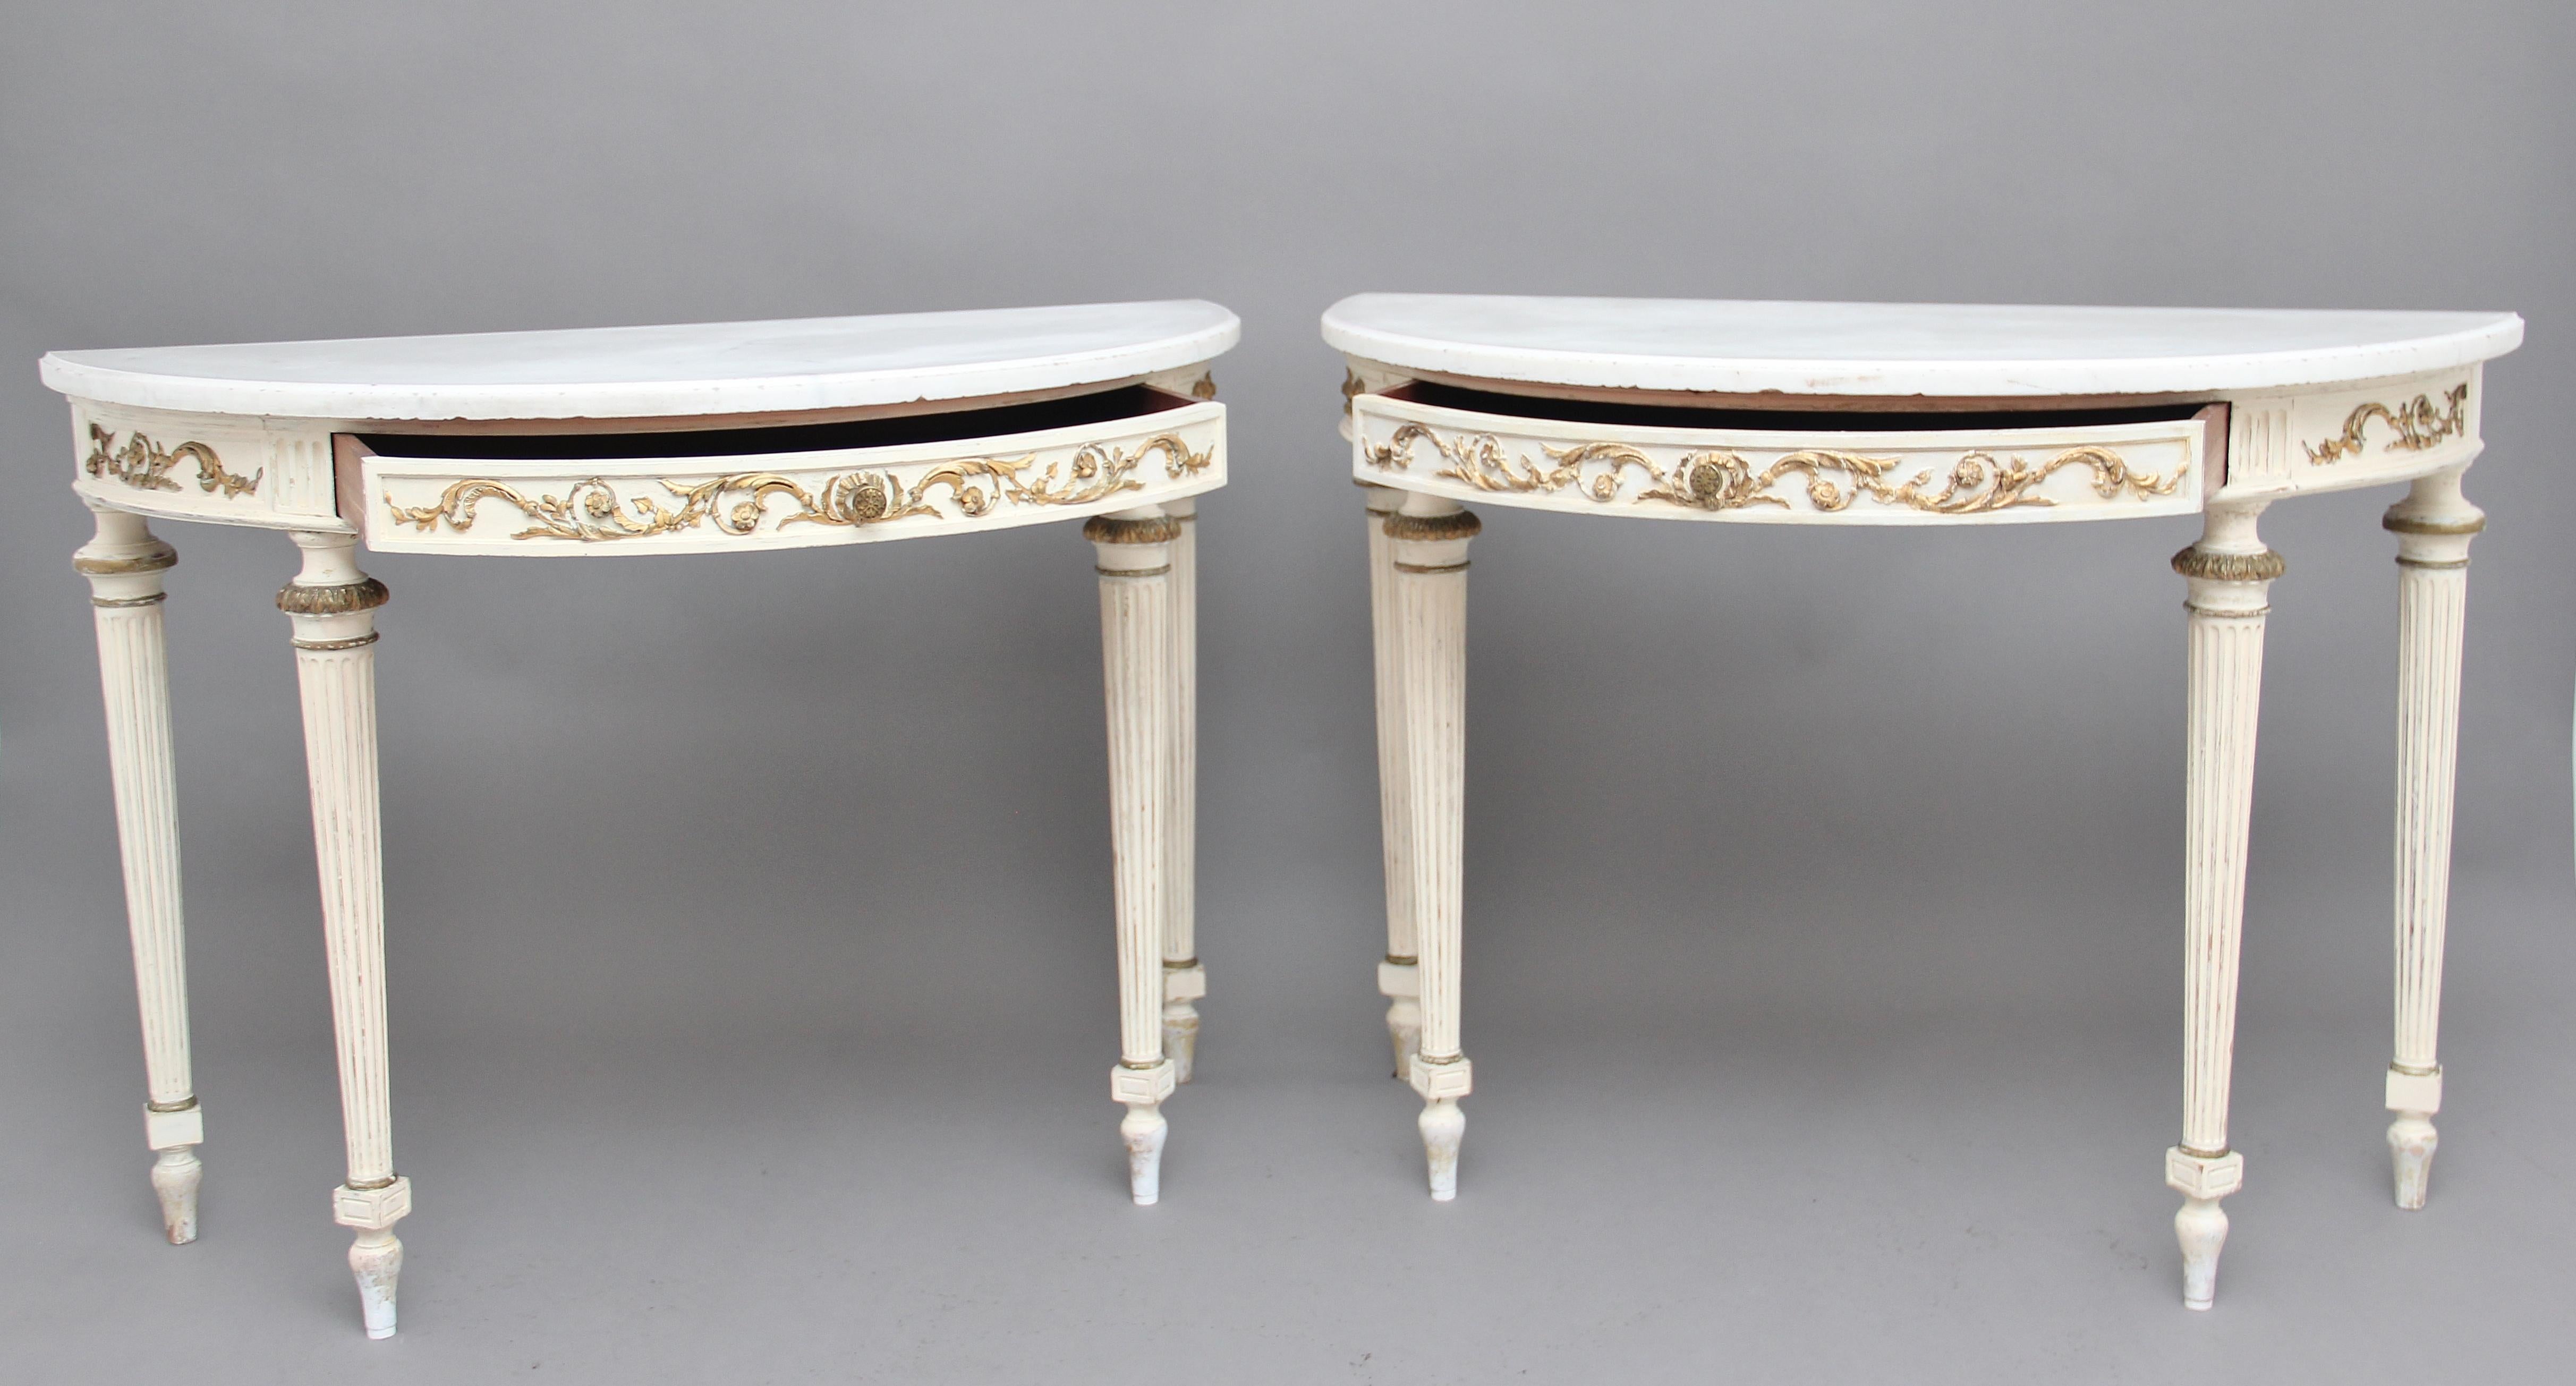 Late 19th Century Pair of 19th Century French Painted Console Tables with original marble tops